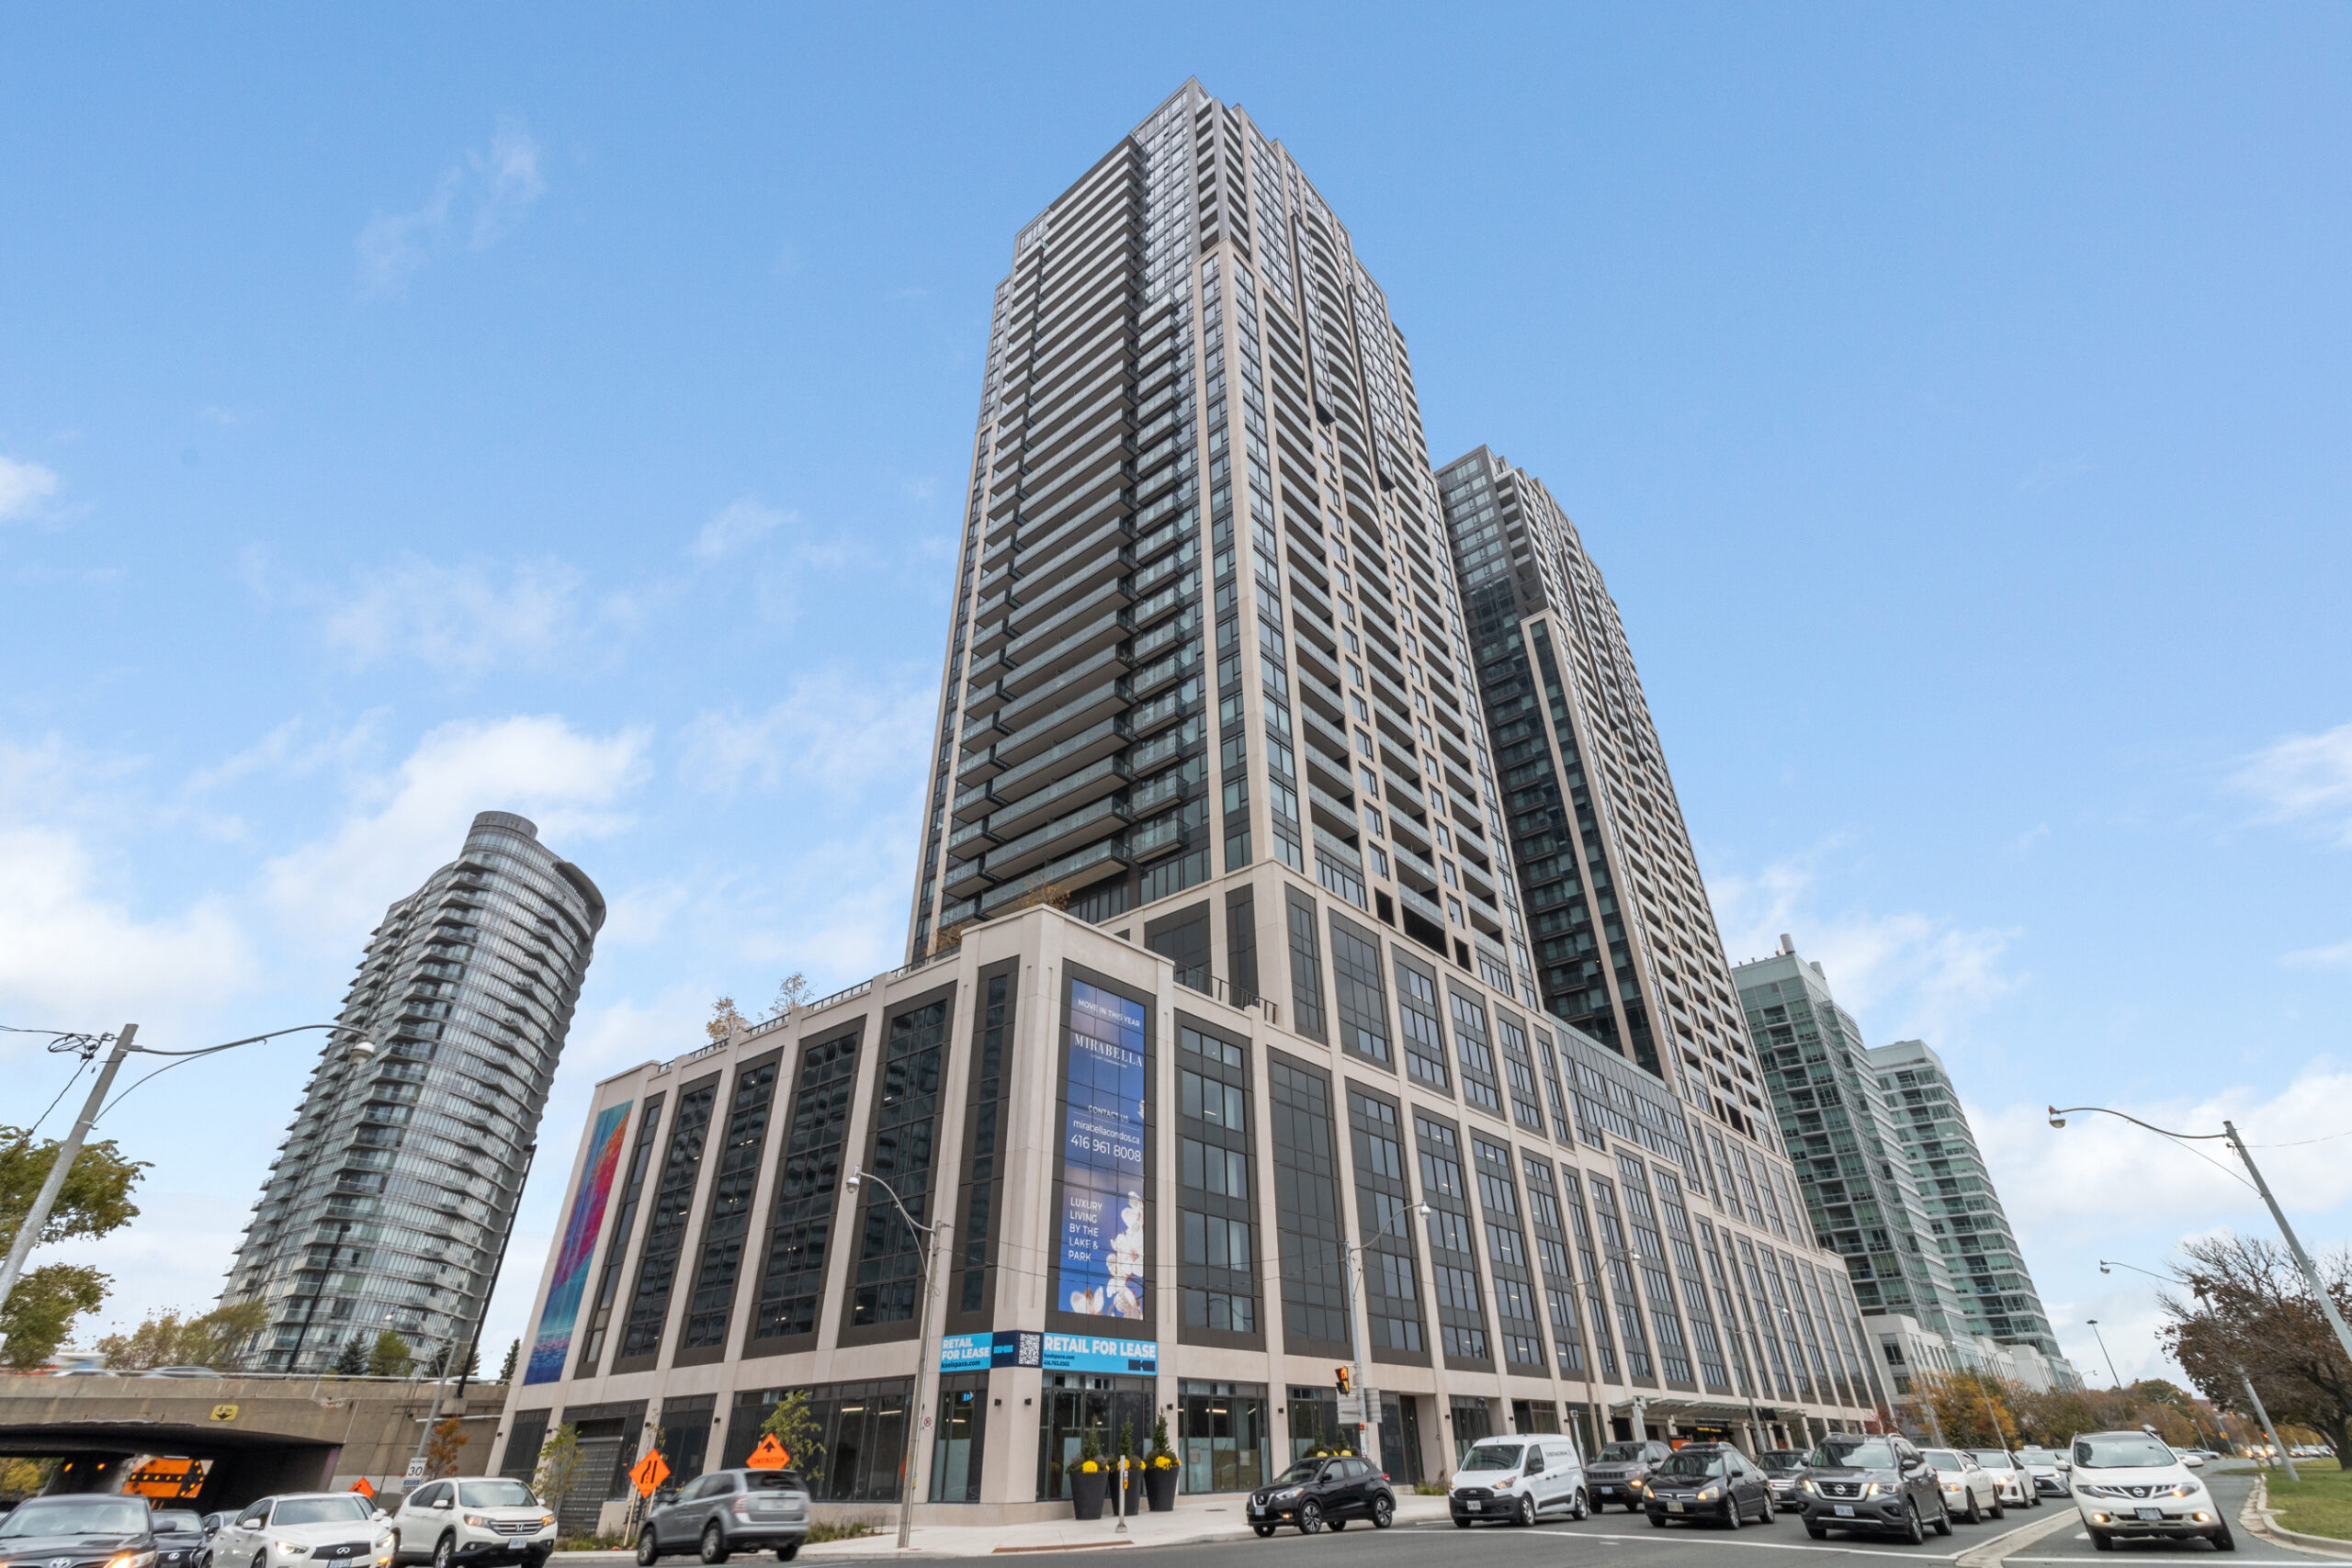 2+1 BDRM Furnished Condominium for Lease at 1928 Lake Shore Bl. W #3912 Toronto